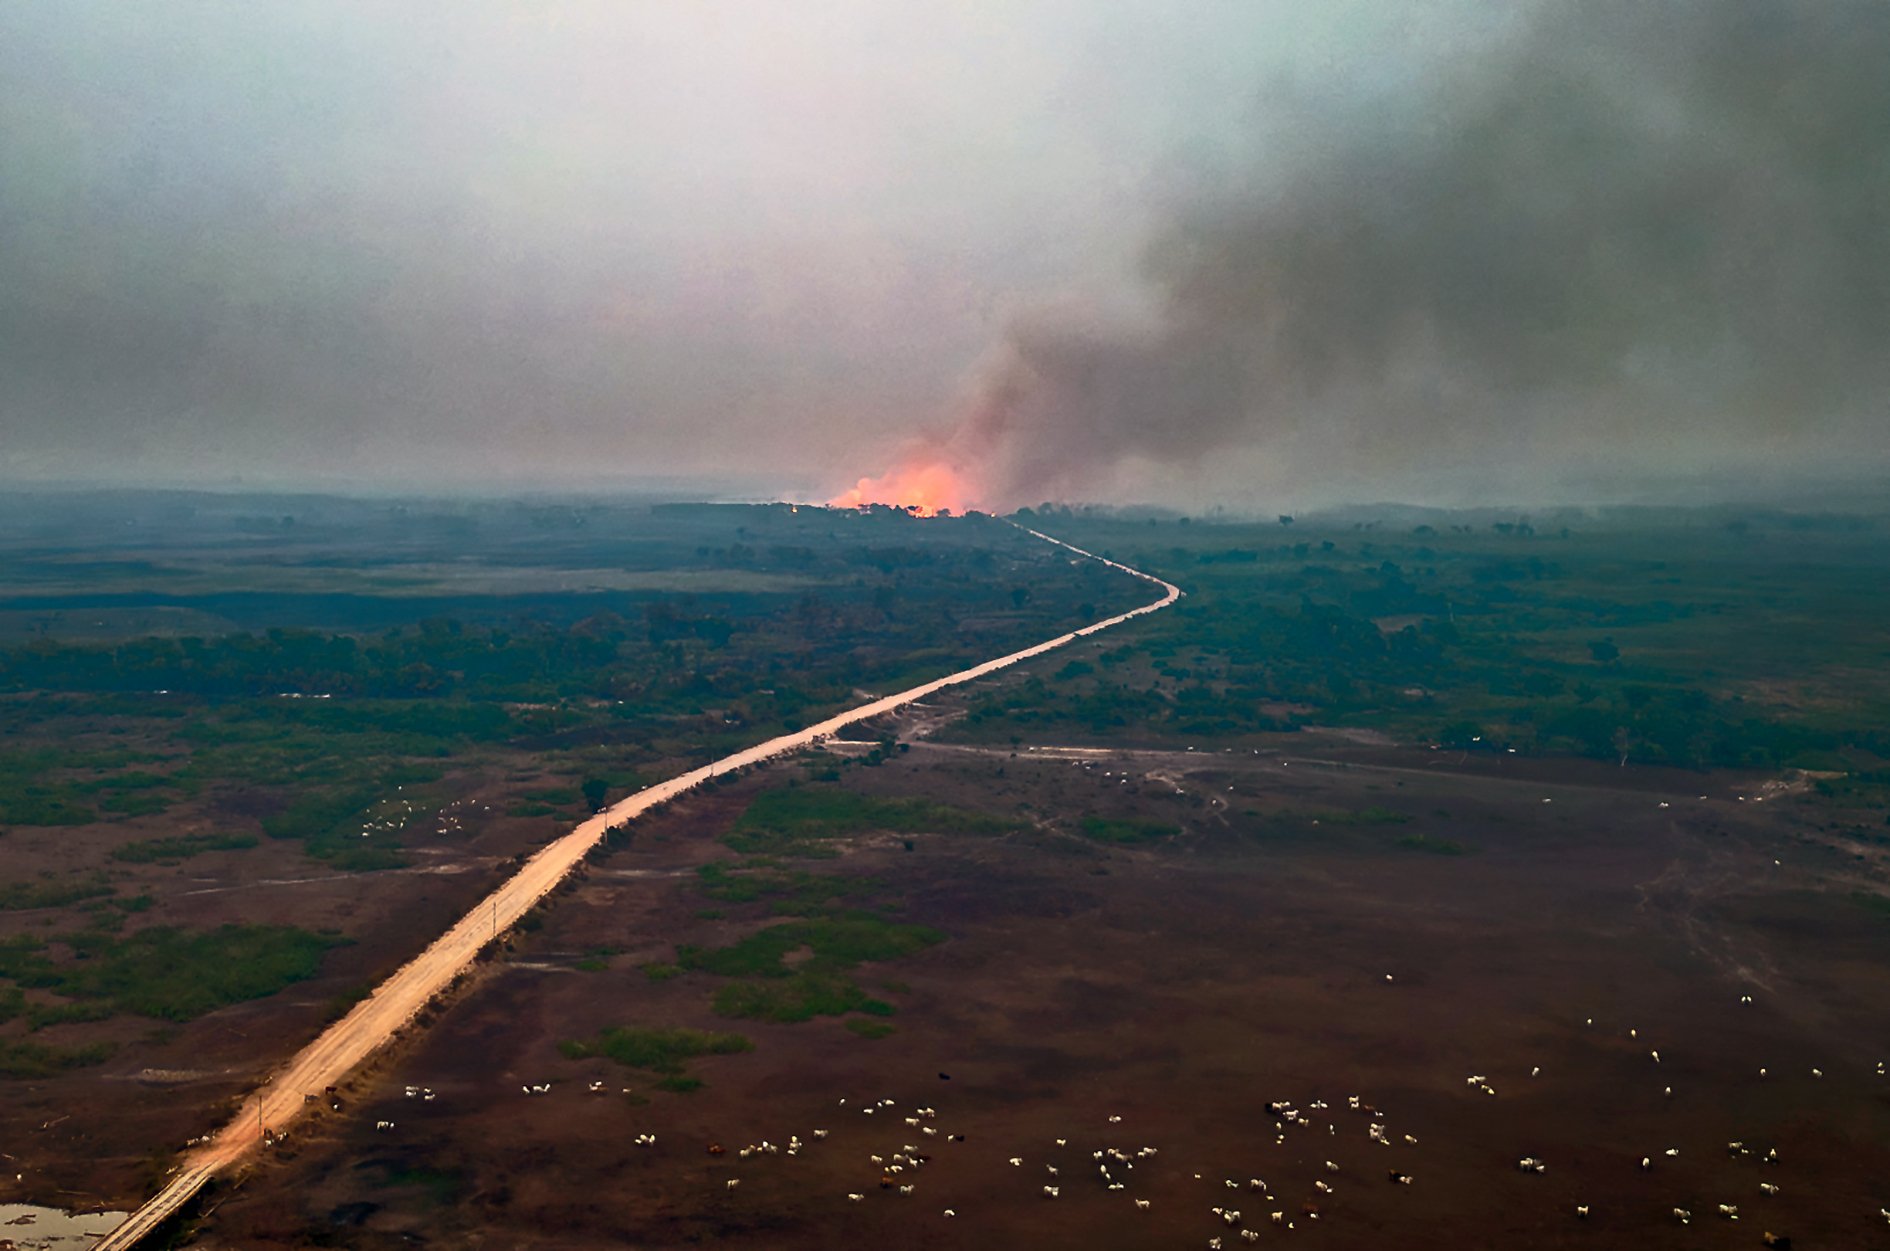 (FILES) An aerial view of a forest fire in the Encontro das Aguas park in the Pantanal wetlands in Porto Jofre, Mato Grosso State, Brazil, on November 19, 2023. The severe drought in much of Brazil, caused by climate change, and the expansion of agricultural crops are the main reasons for the record number of fires in the Pantanal region, according to Brazilian physicist Paulo Artaxo. (Photo by ROGERIO FLORENTINO / AFP)